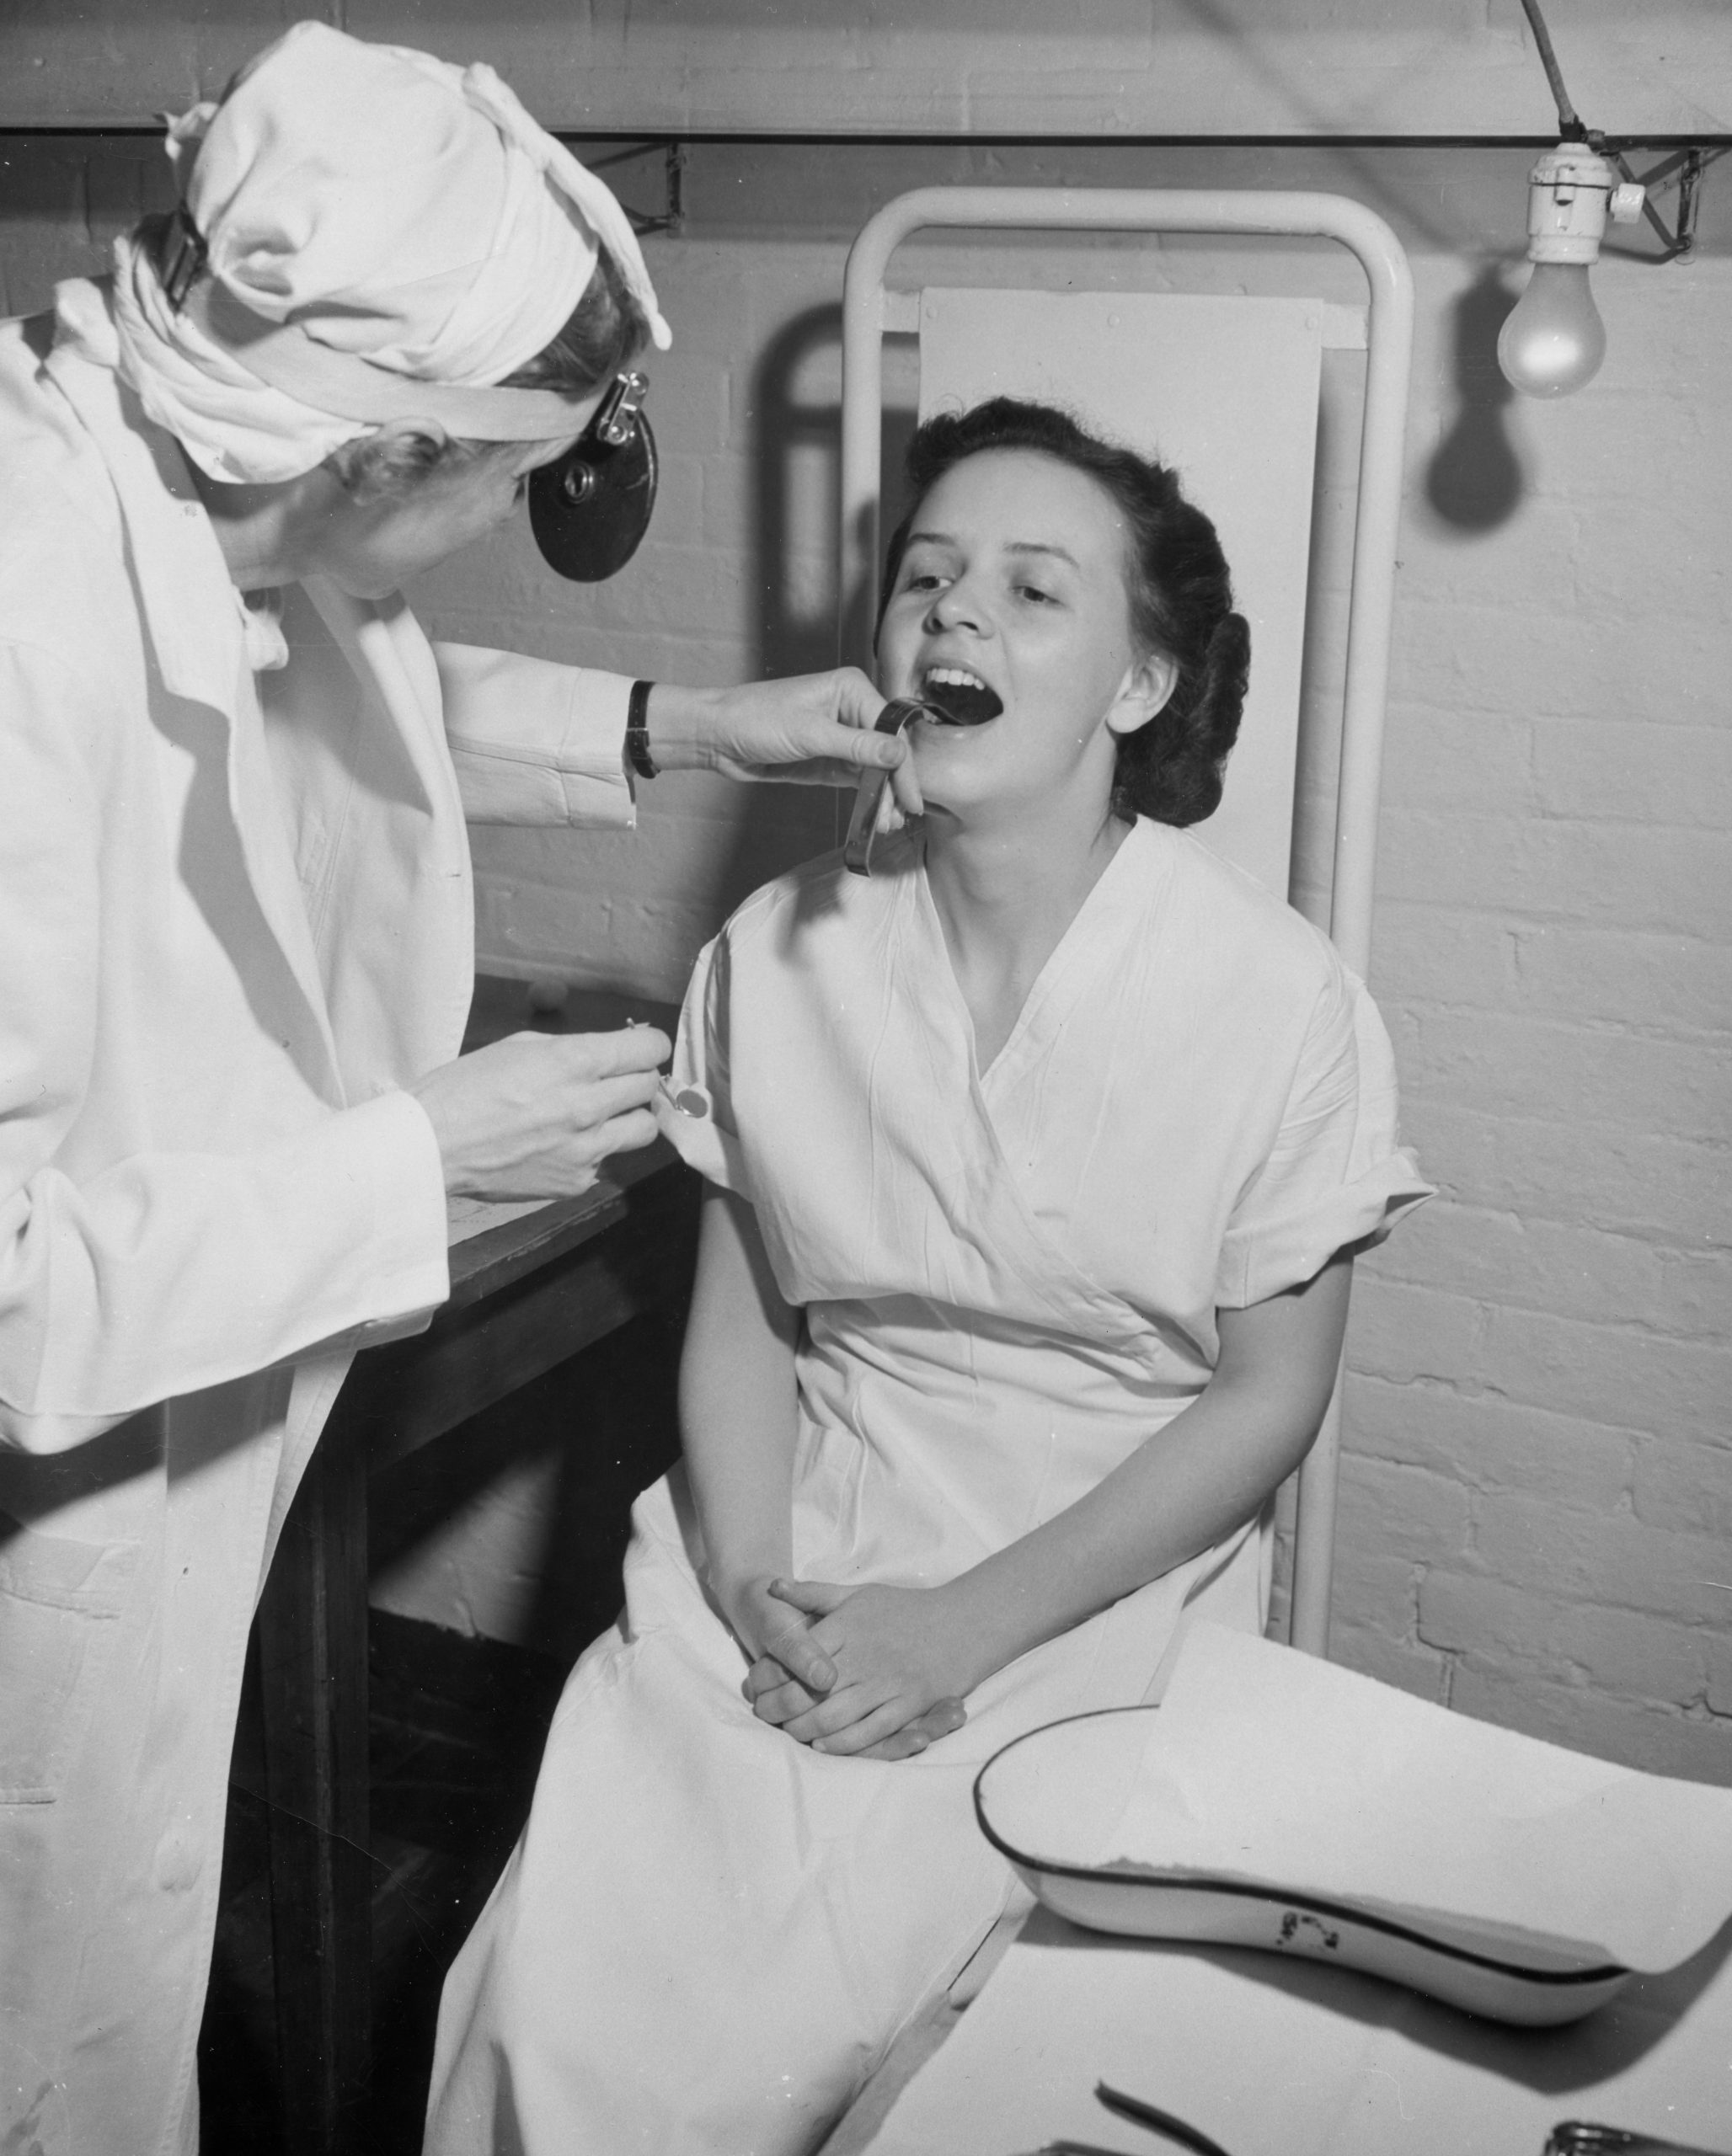 A black and white photo of a woman in scrubs with a head mirror examines the open mouth of a young woman in a hospital gown.